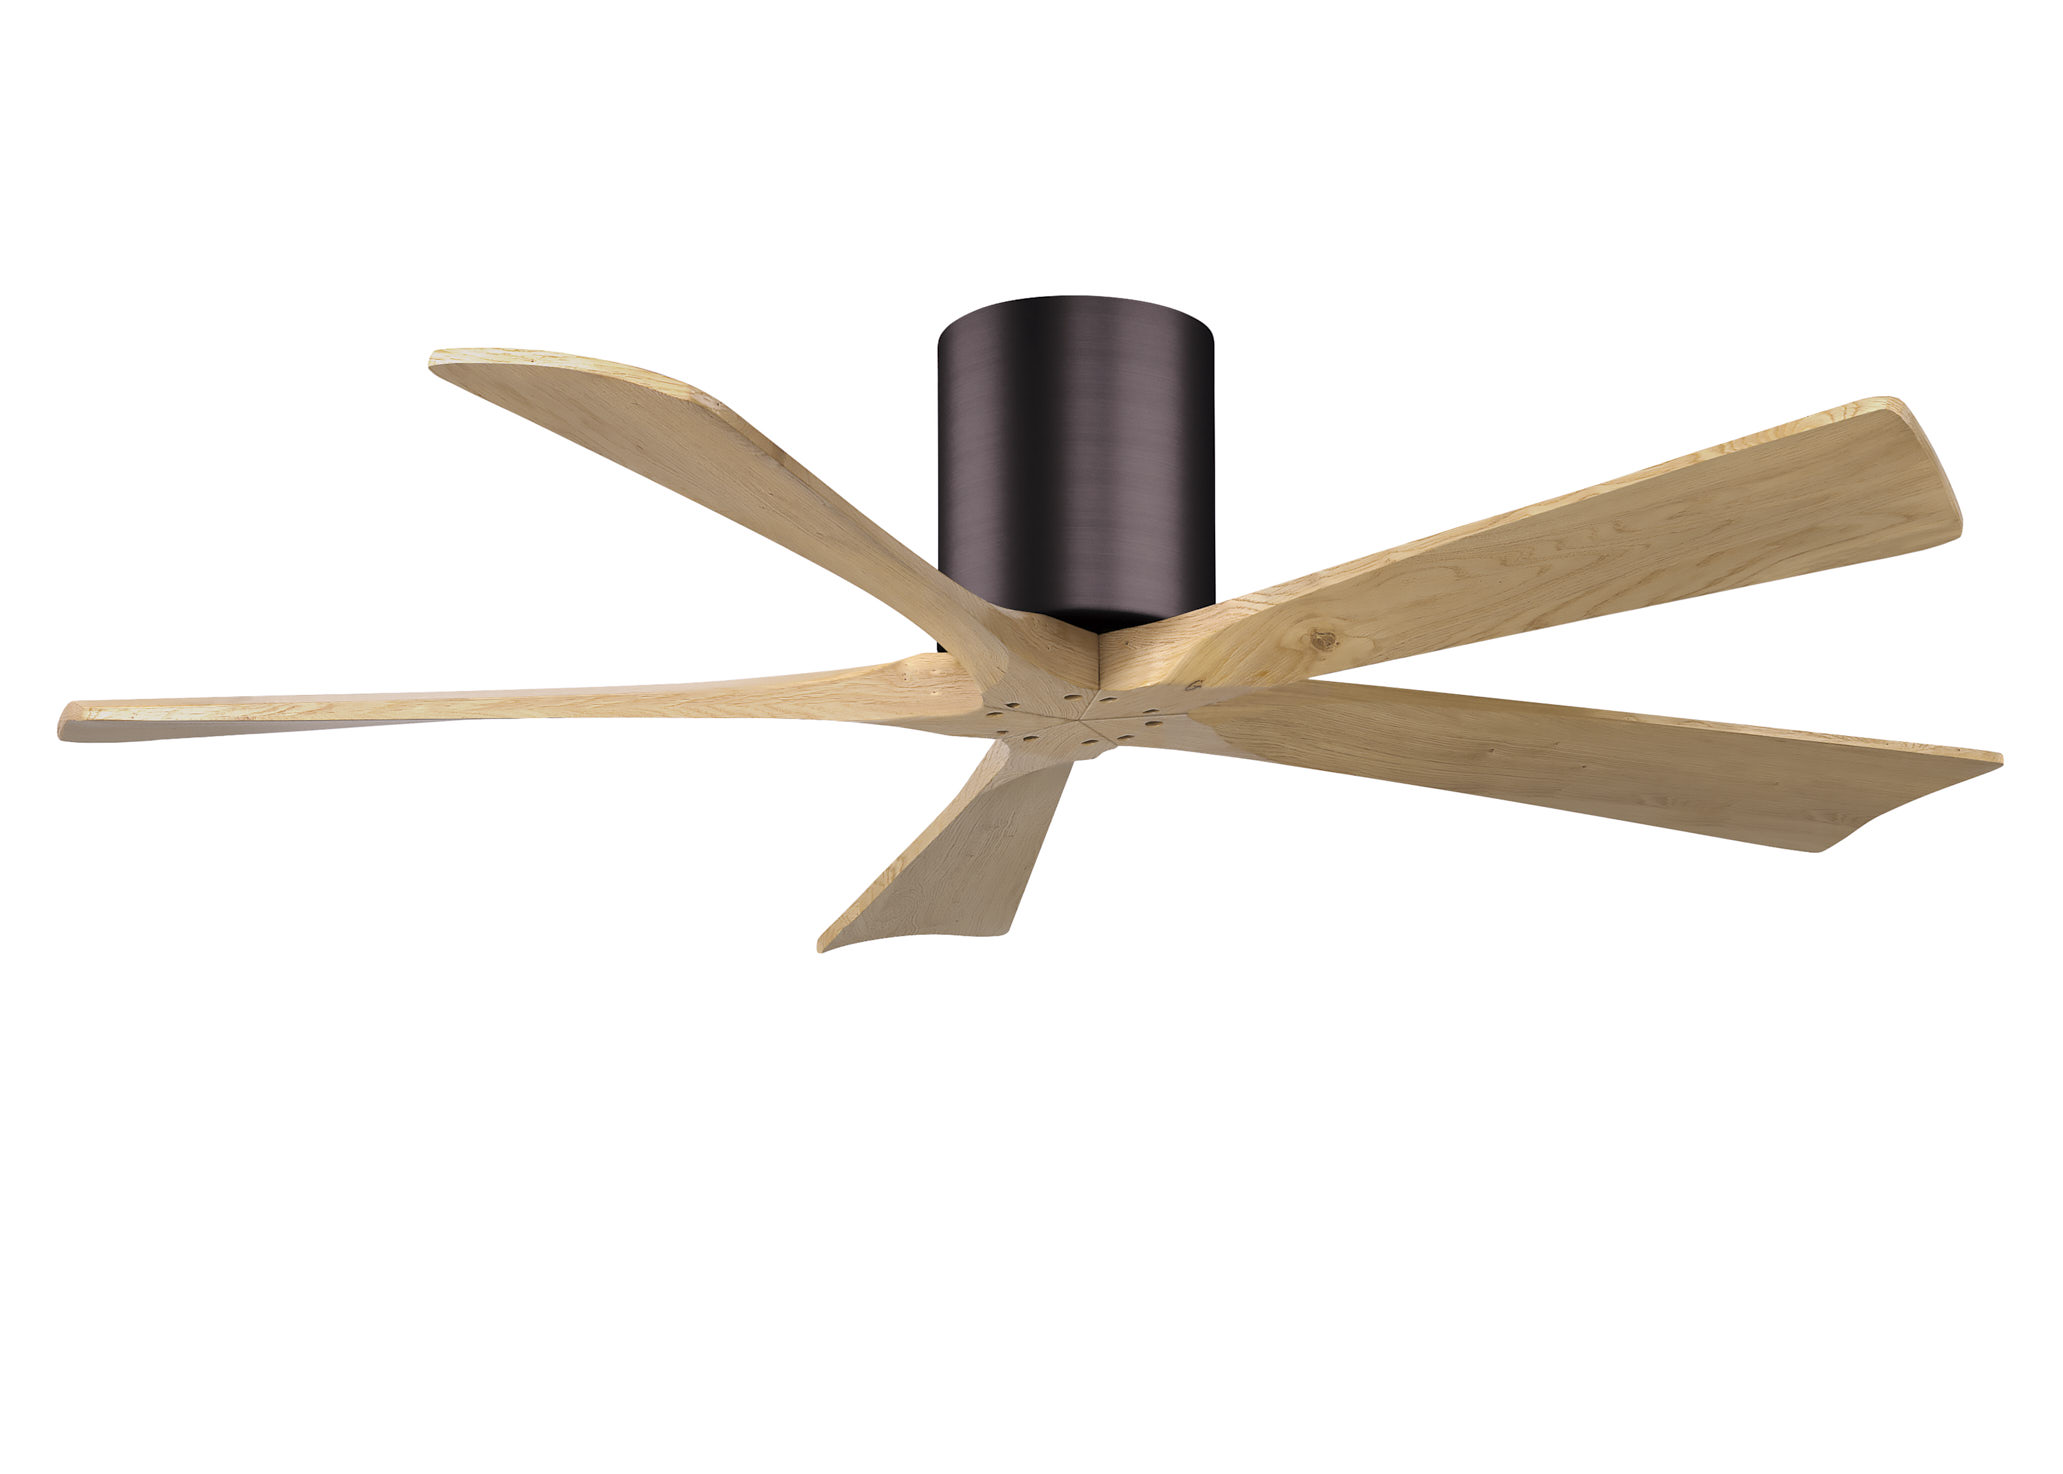 Irene-5H 6-speed ceiling fan in brushed bronze finish with 52